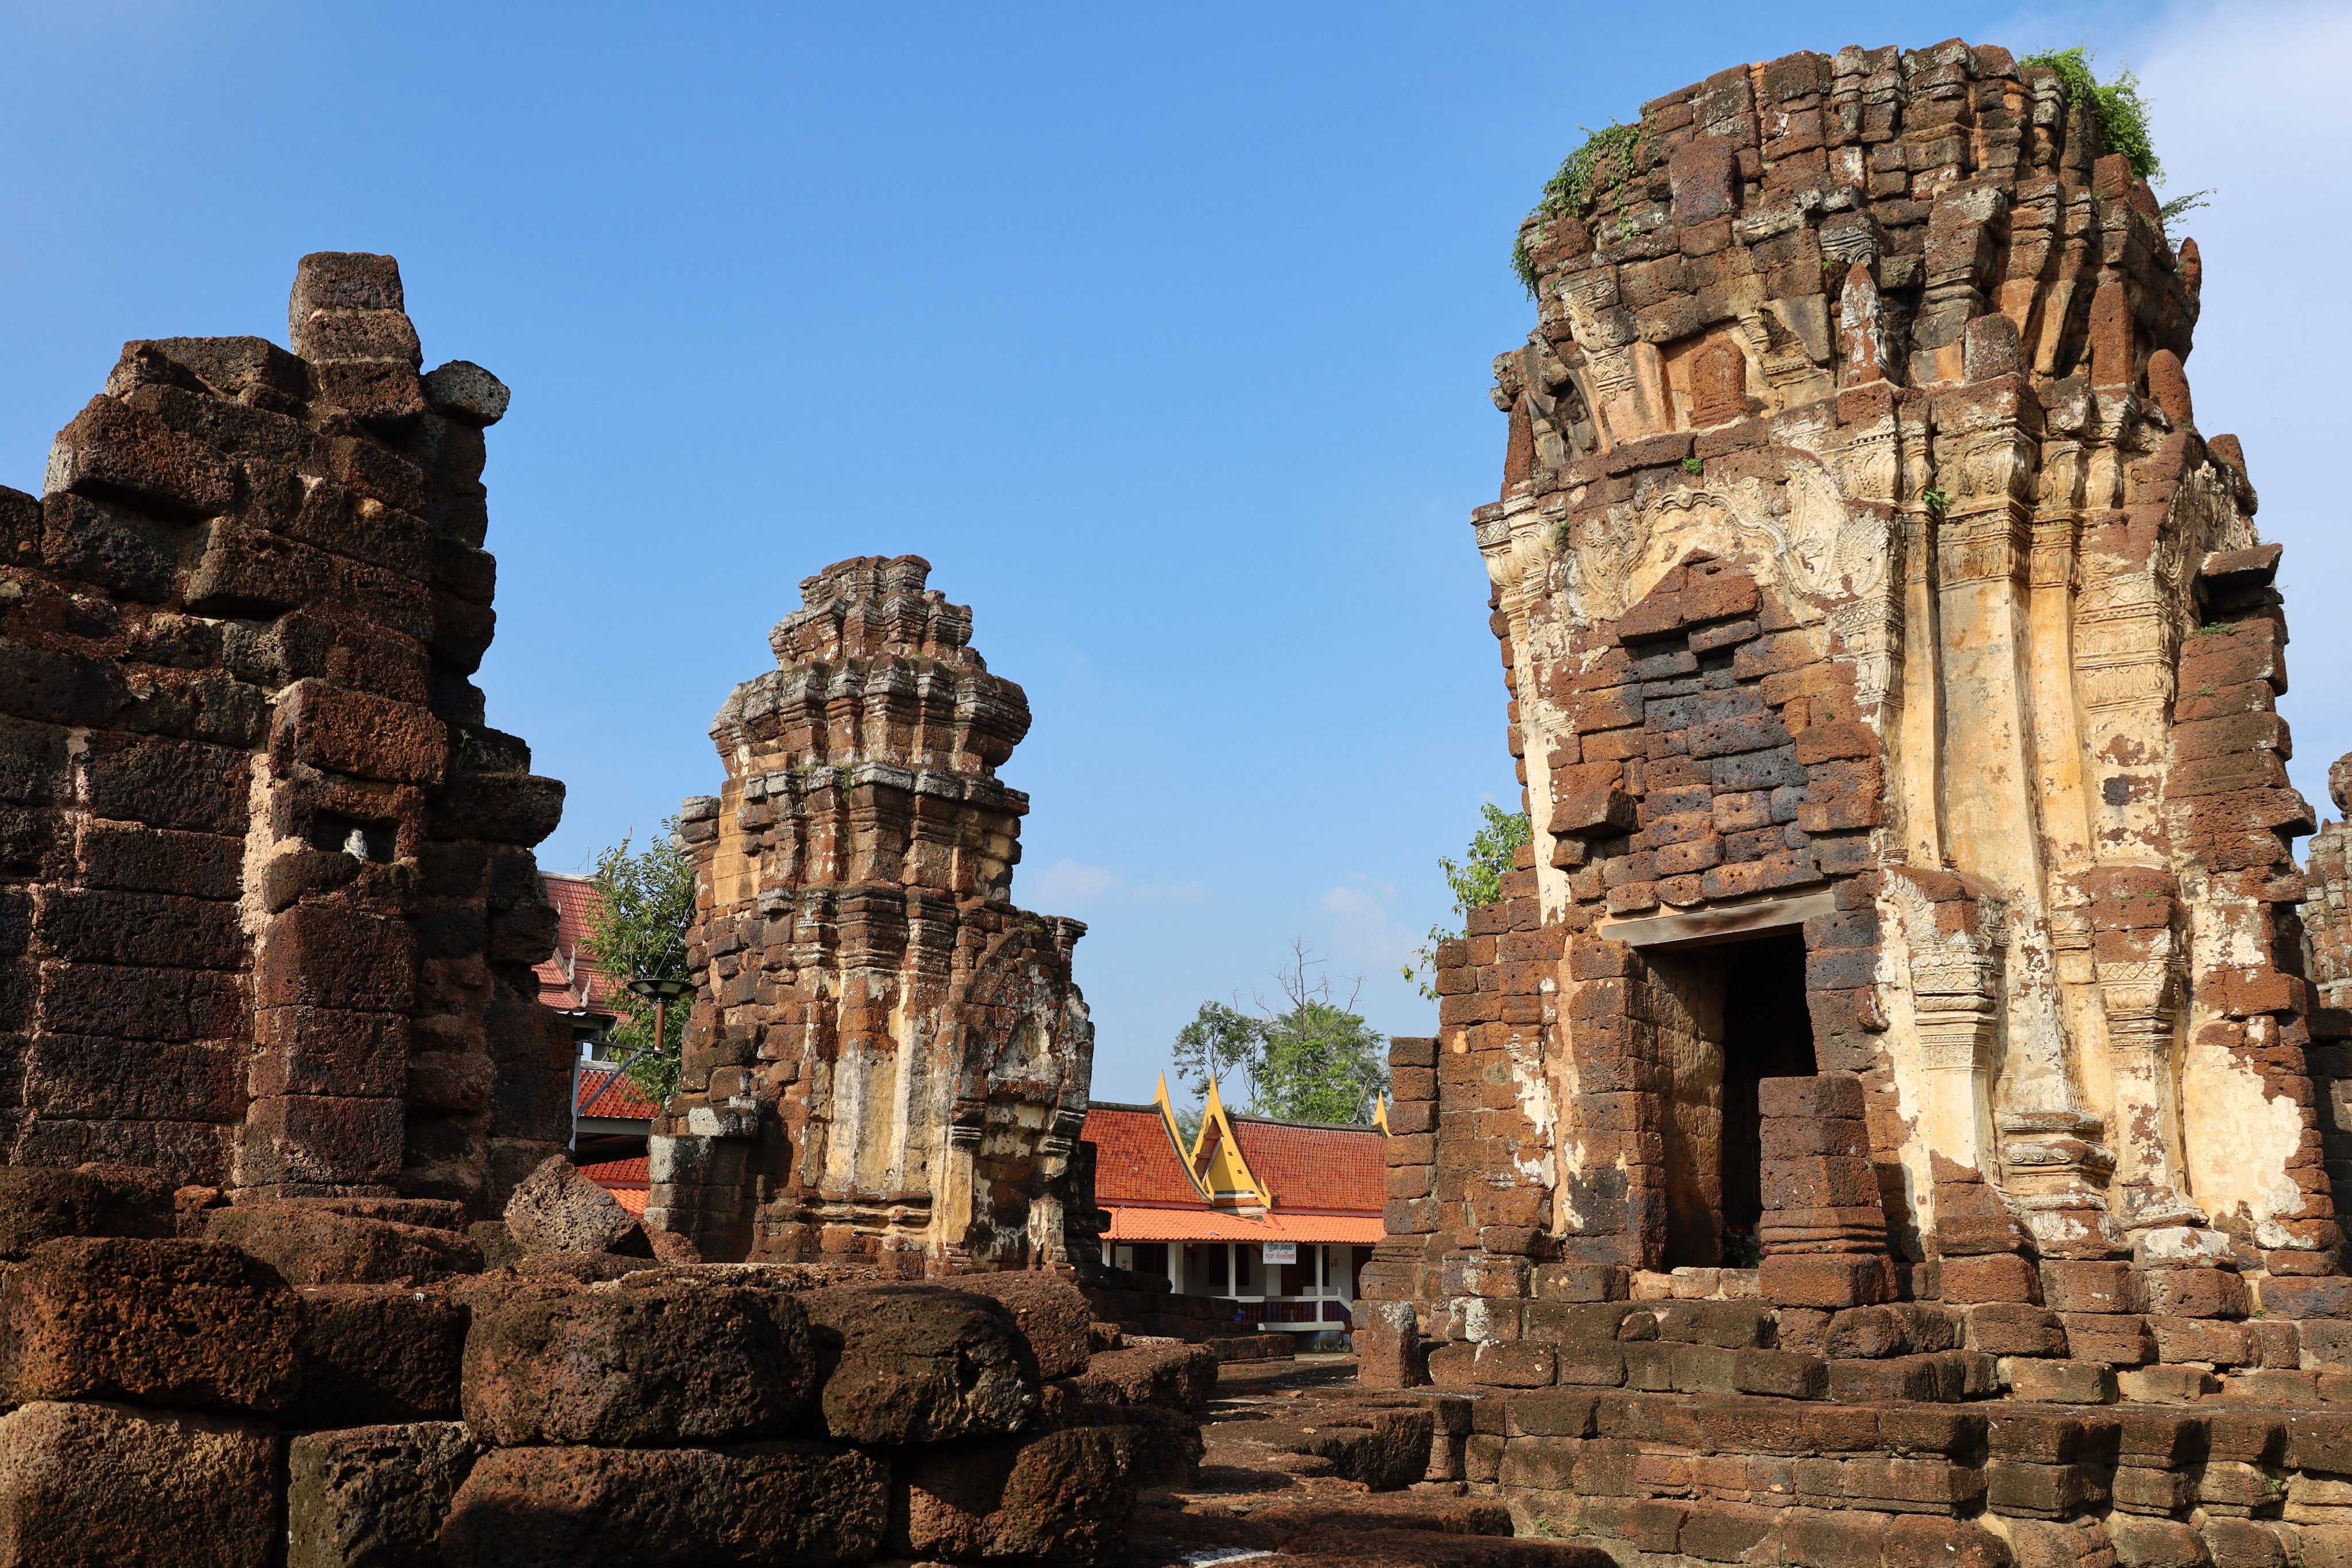 The towers of Wat Kamphaeng Laeng, the remains of a Khmer Empire temple in Phetchaburi, Thailand. Photo: Thomas Bird